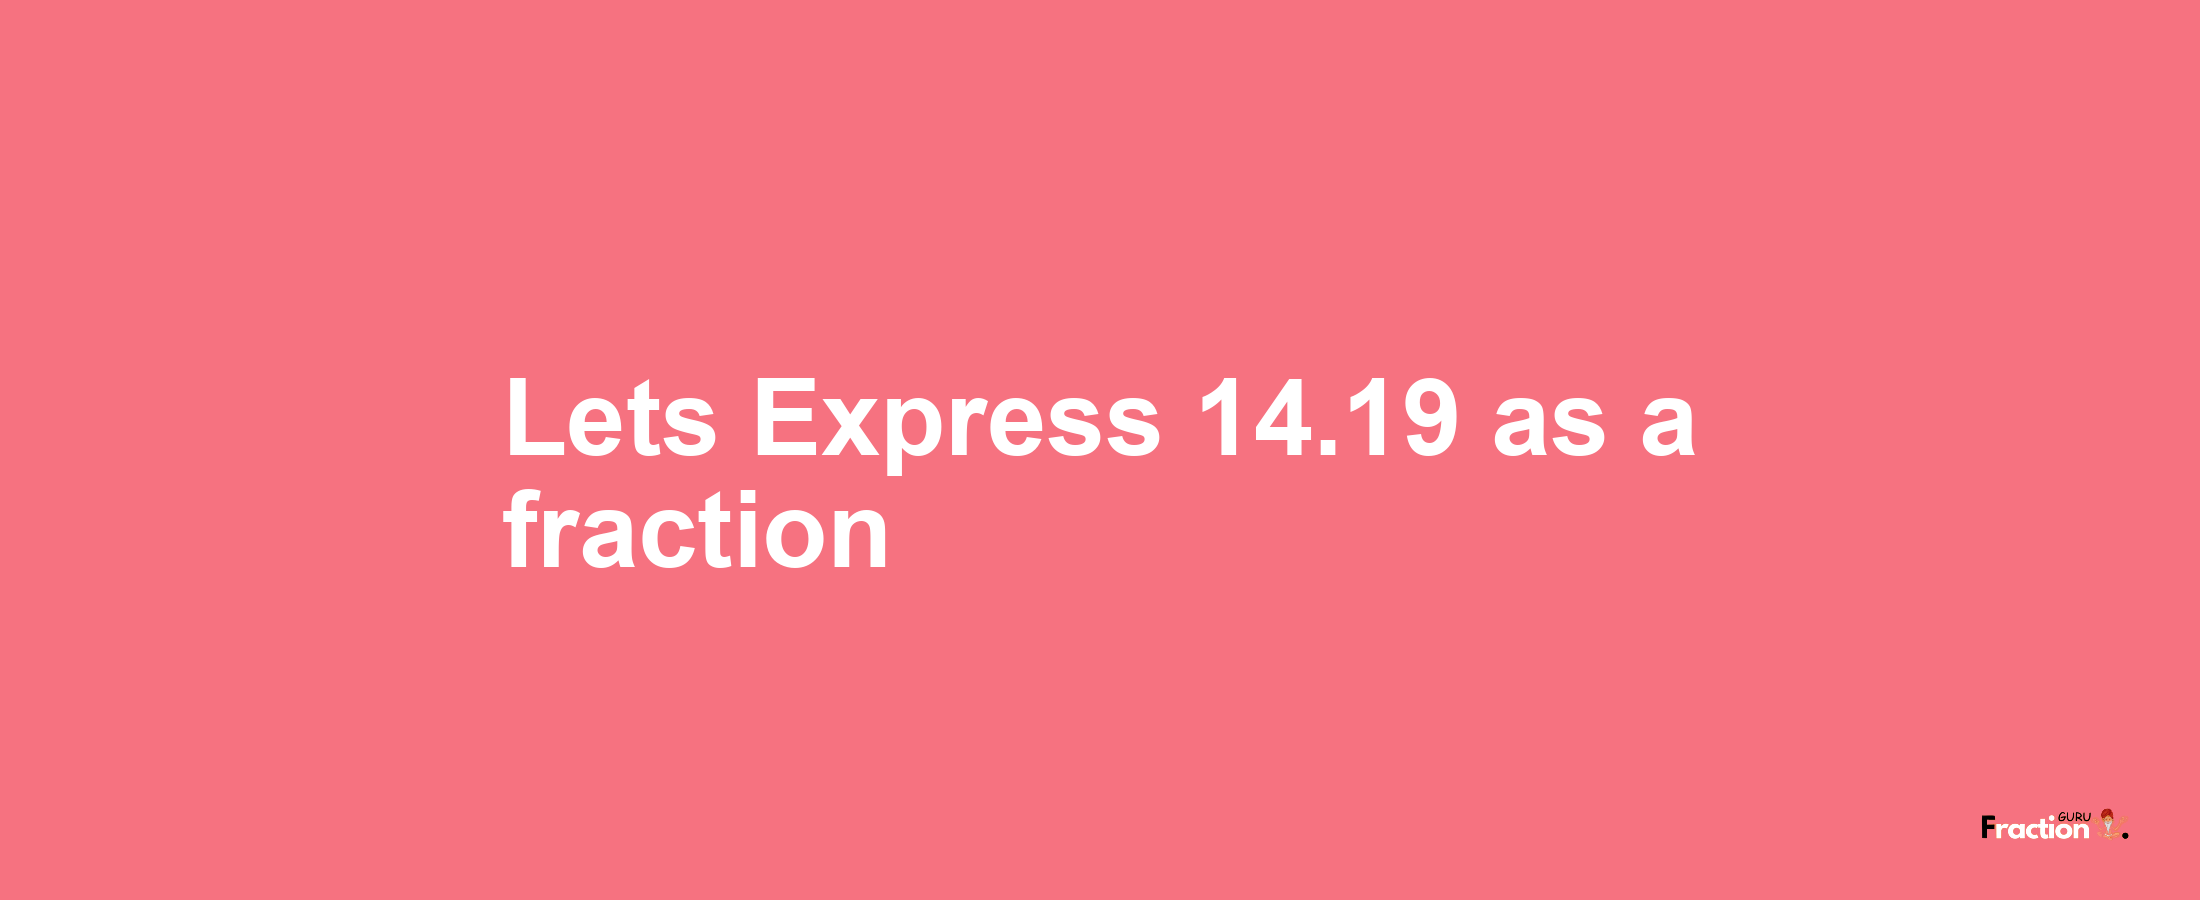 Lets Express 14.19 as afraction